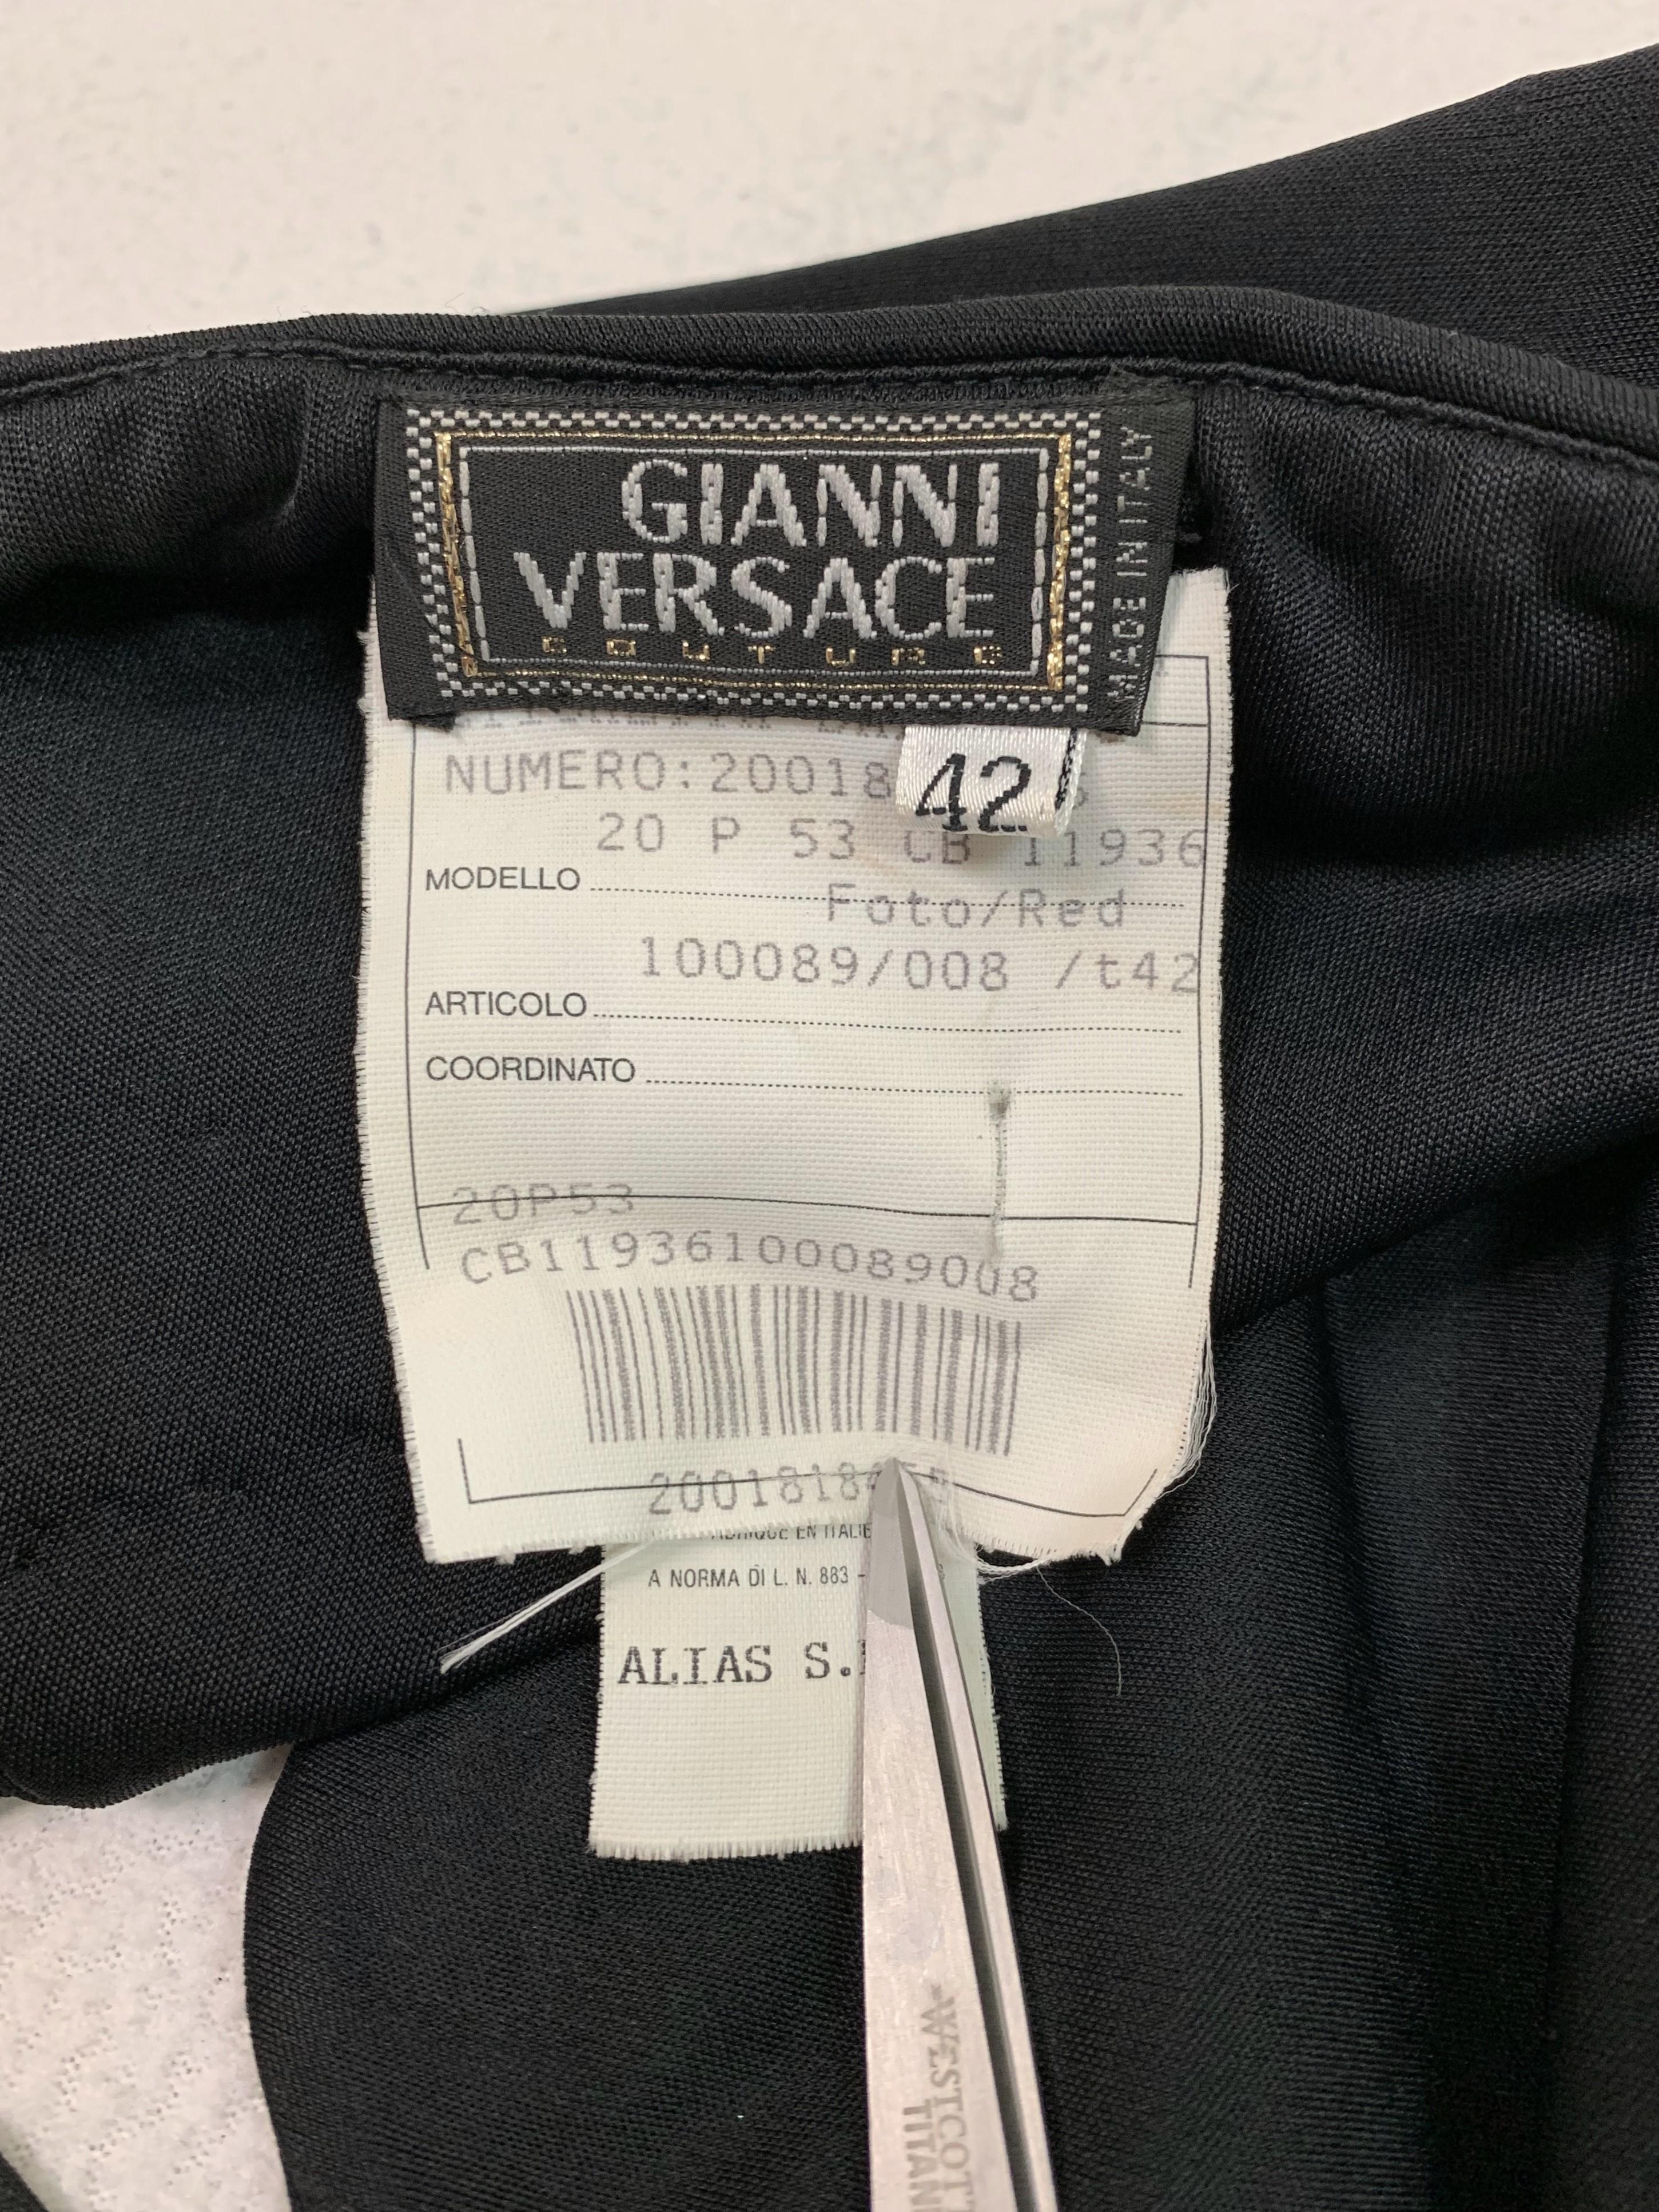 S/S 2000 Gianni Versace Runway Black Cut-Out Gold Charm Swimsuit In Good Condition In Yukon, OK